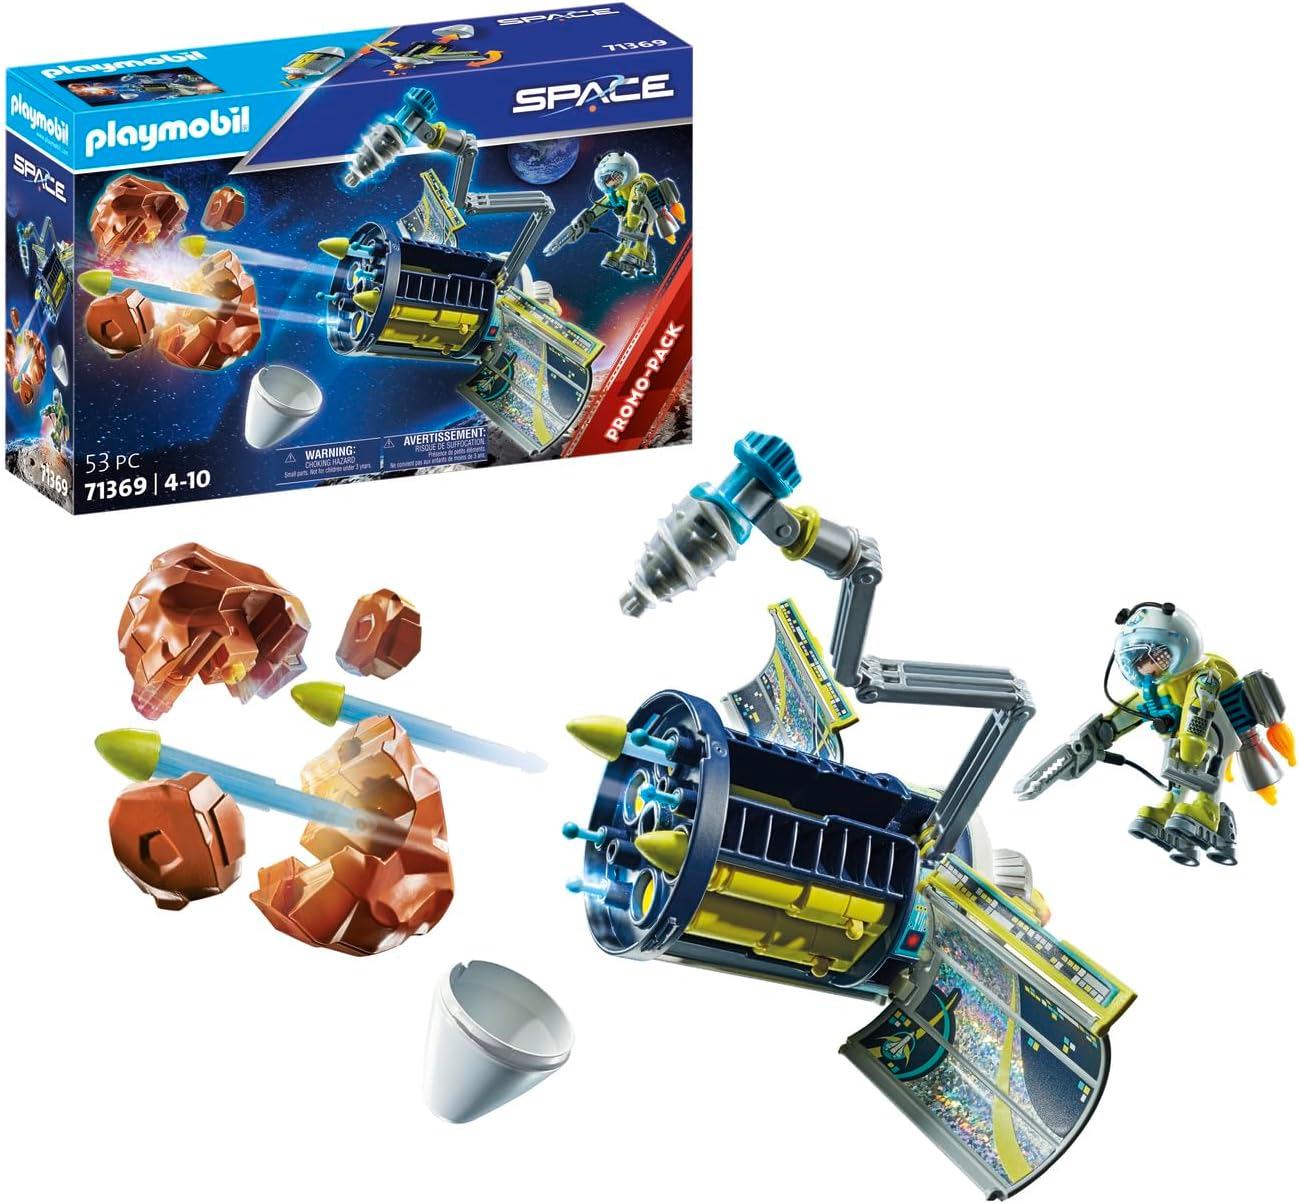 PLAYMOBIL Space Promo Pack 71369 Meteoroid Destroyer, Space, Pivoting Articulated Arm and Shooting Cannons, Toy for Children from 4 Years